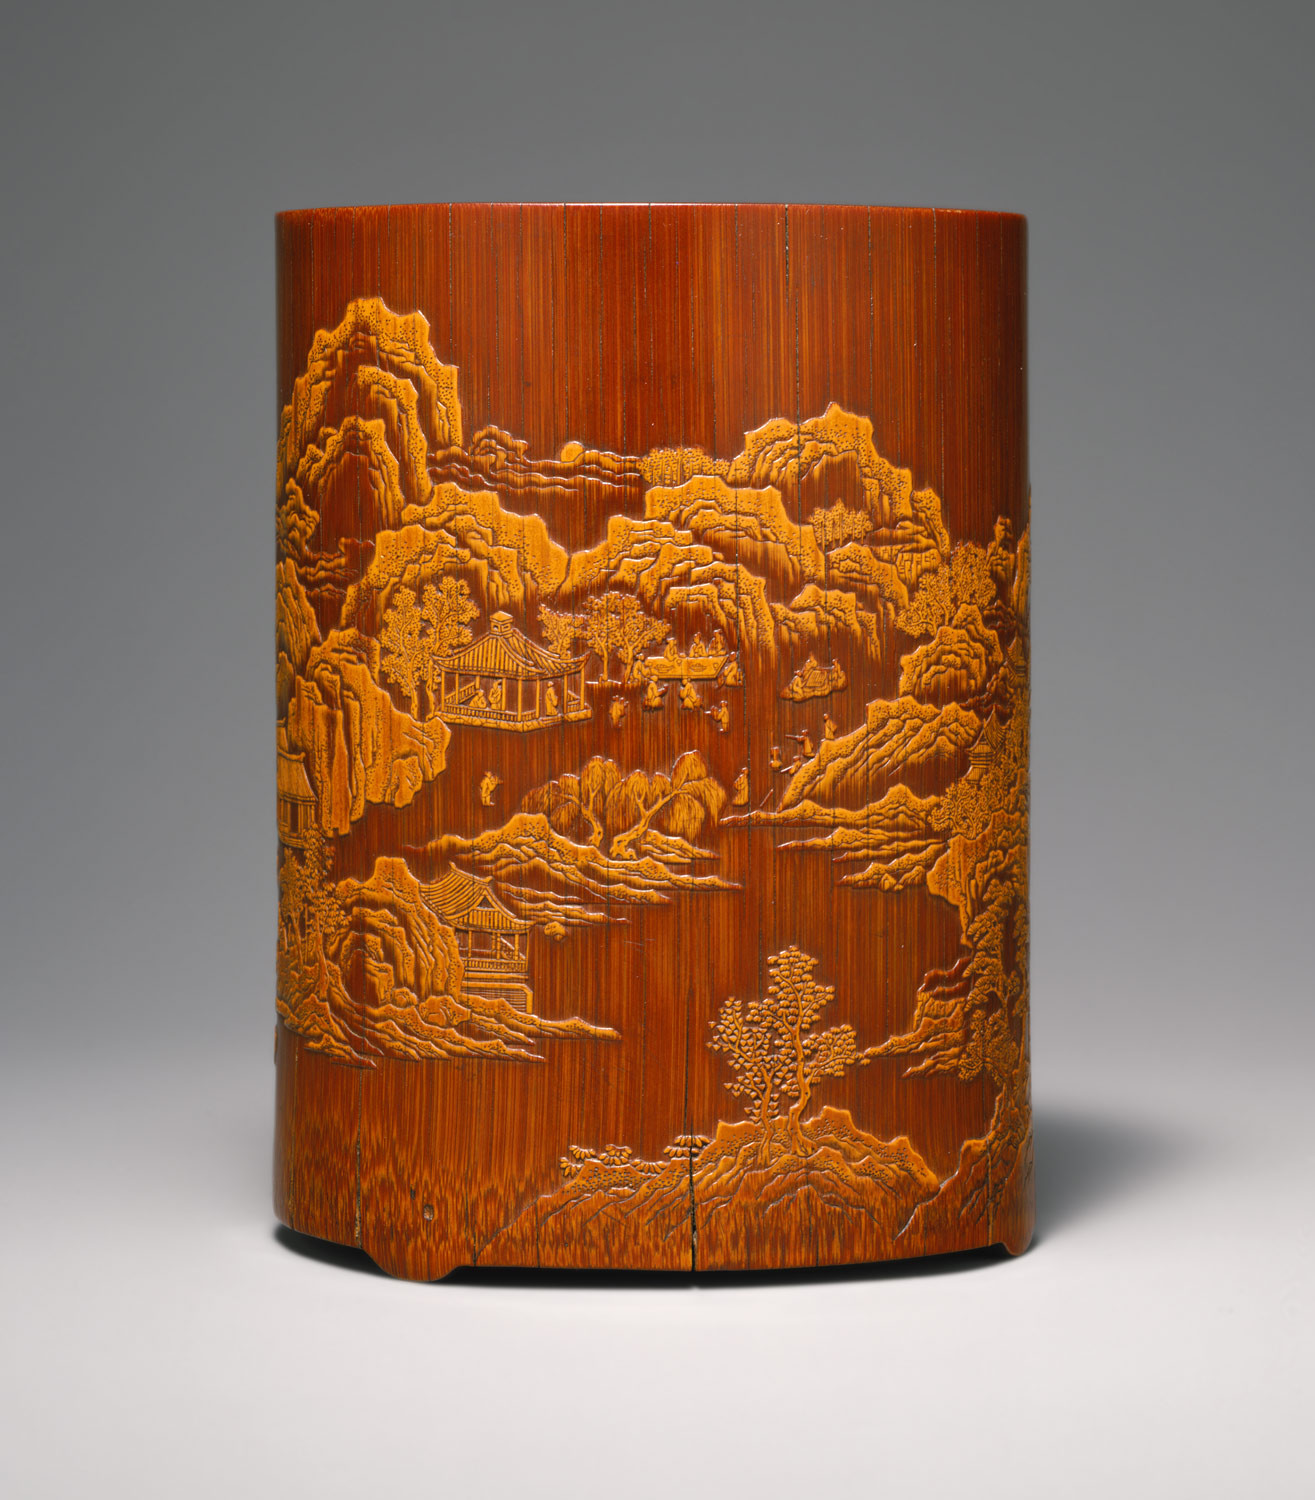 28 Unique 17th Century Chinese Vase 2024 free download 17th century chinese vase of chinese calligraphy essay heilbrunn timeline of art history in brush holder with ode to the pavilion of the inebriated old man